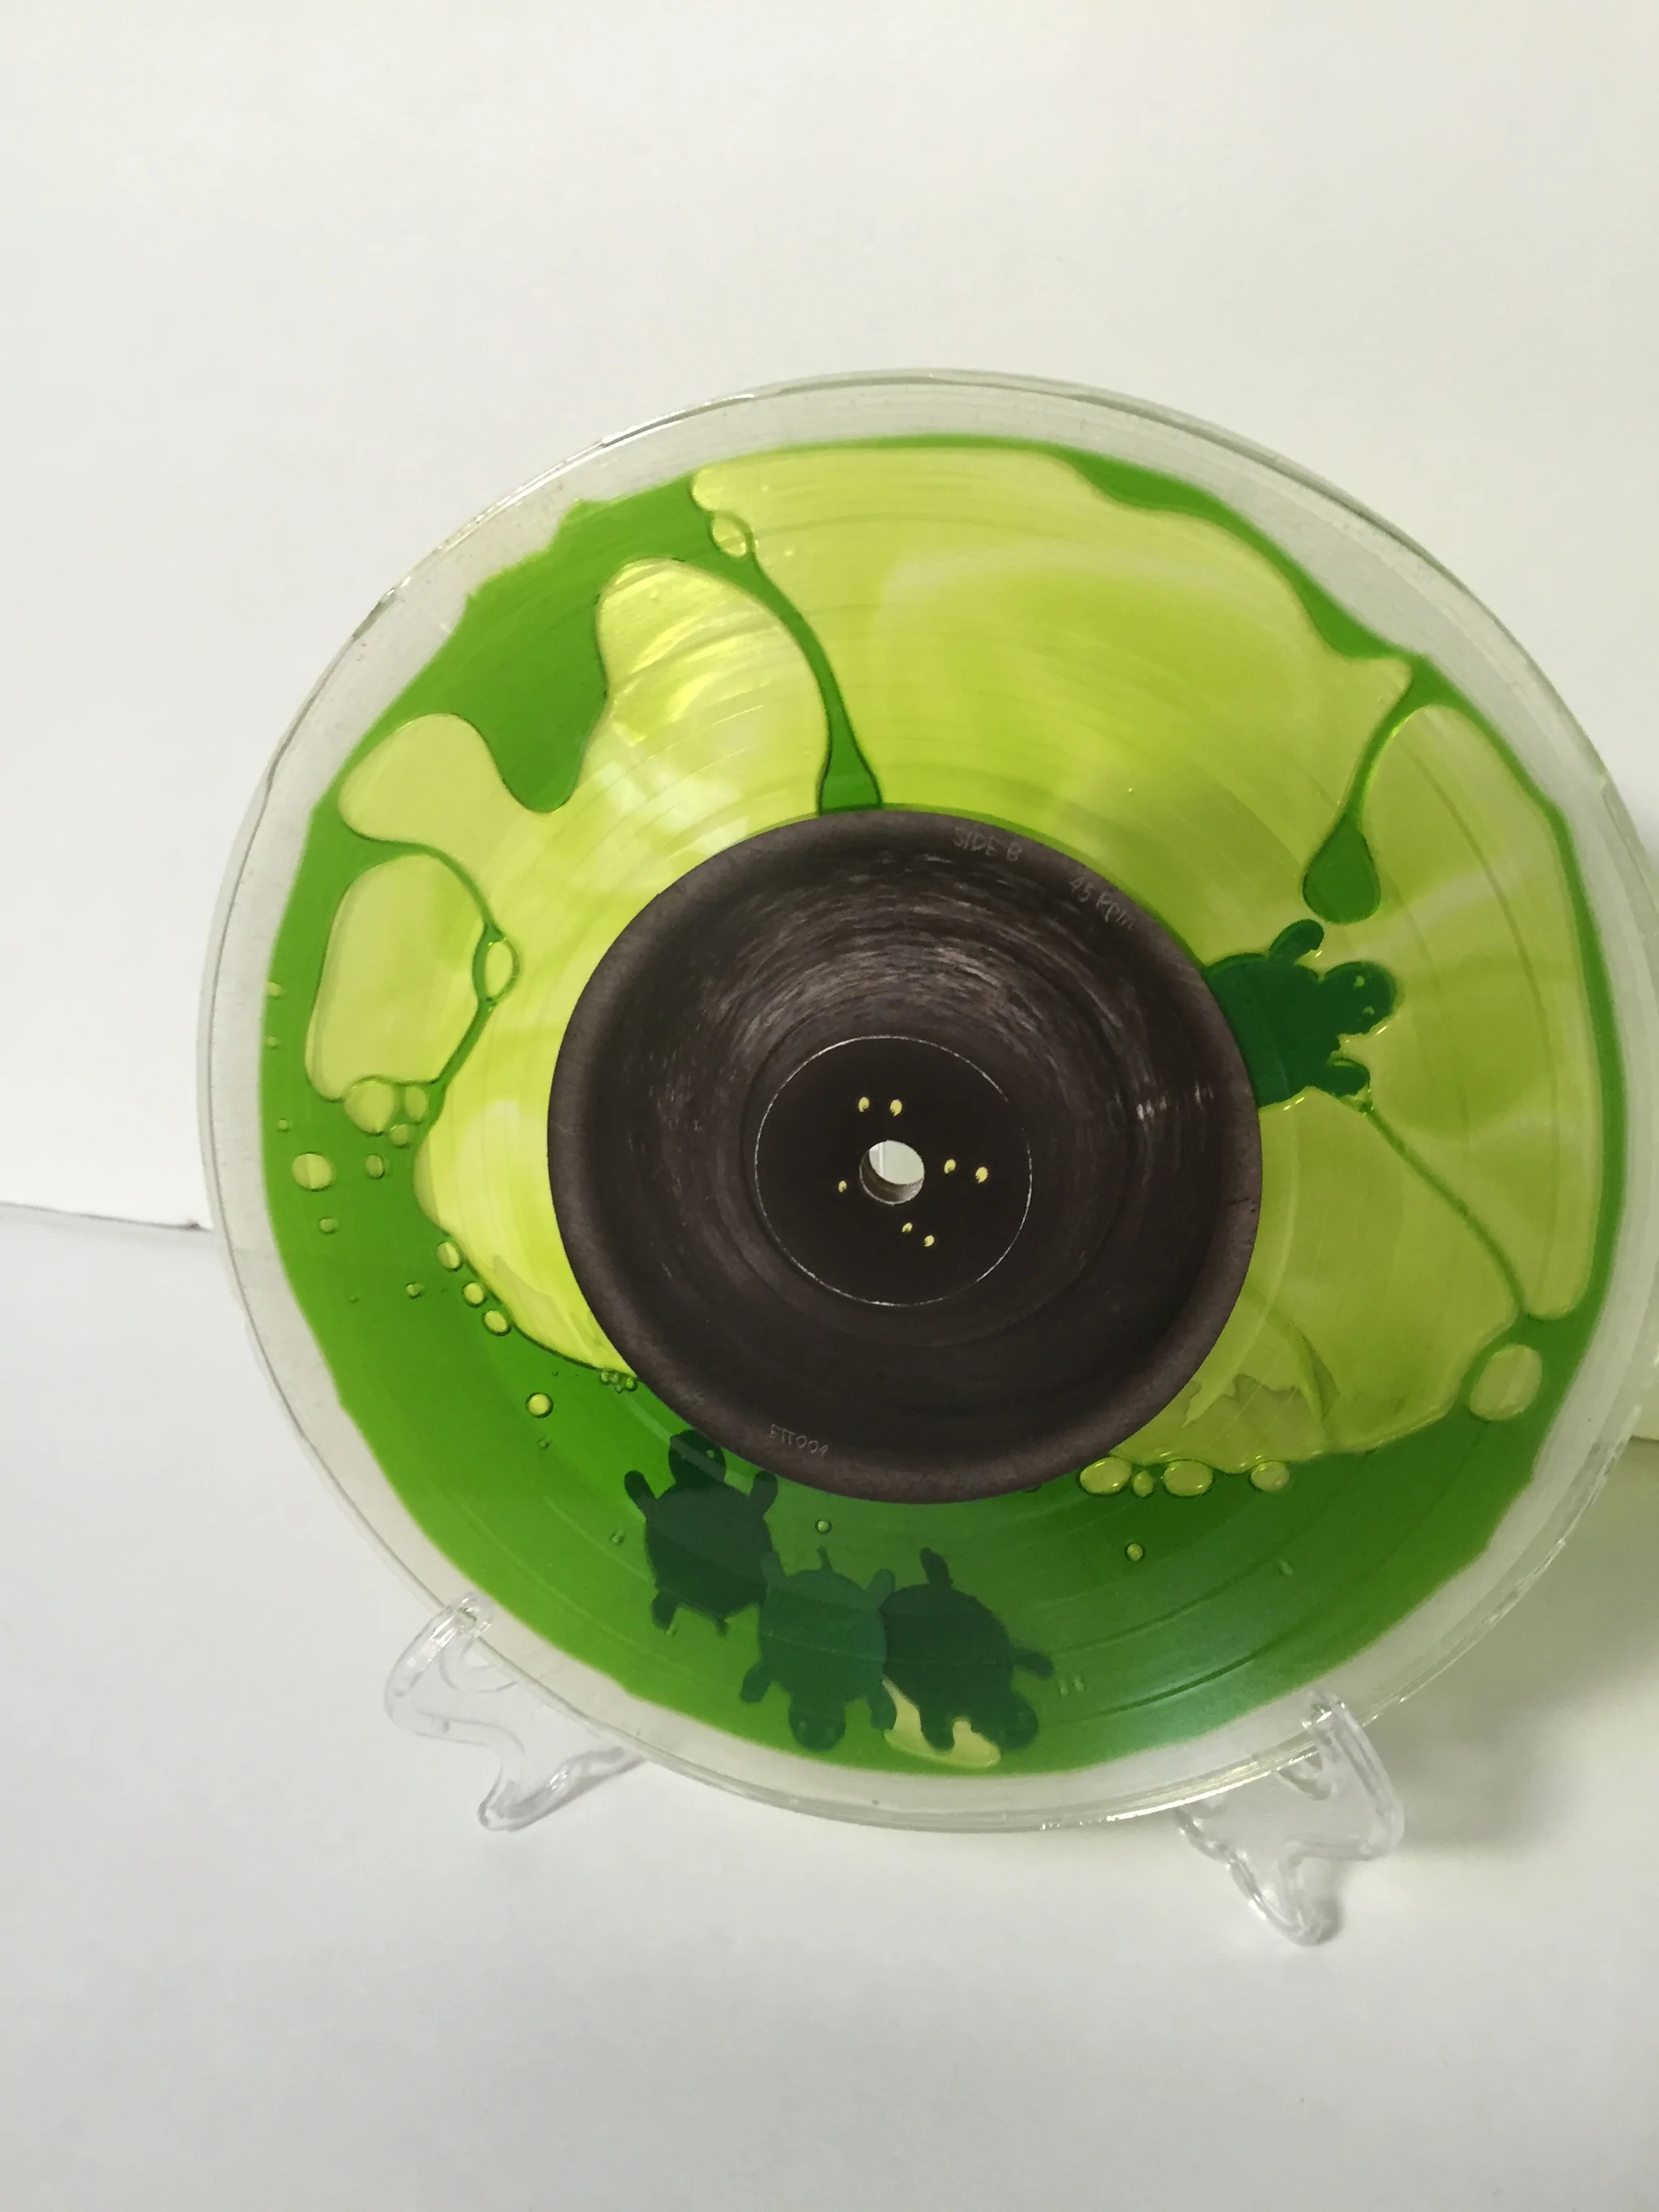 Can Vinyl Records Also Be Green?